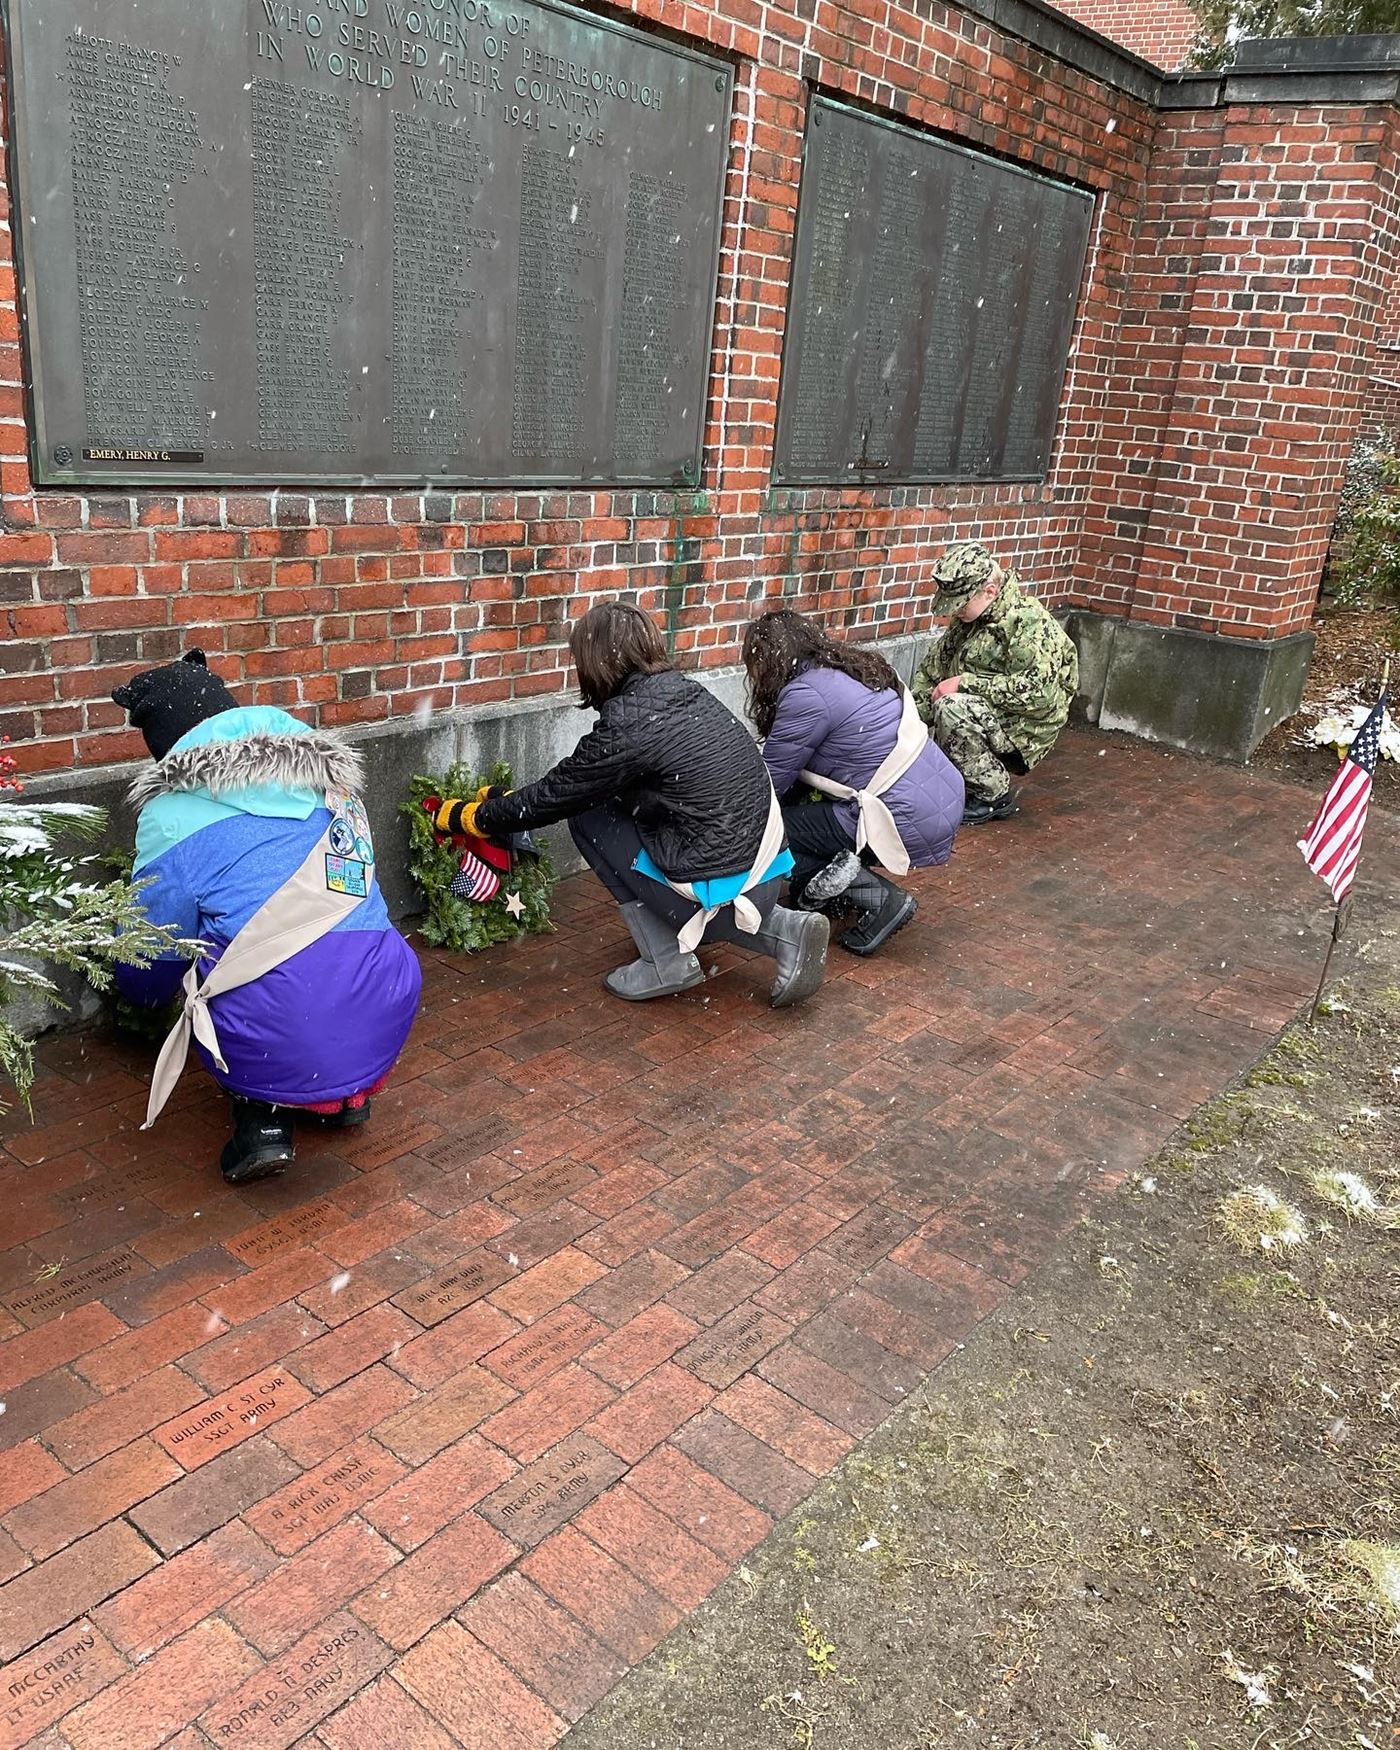 Laying the ceremonial wreaths